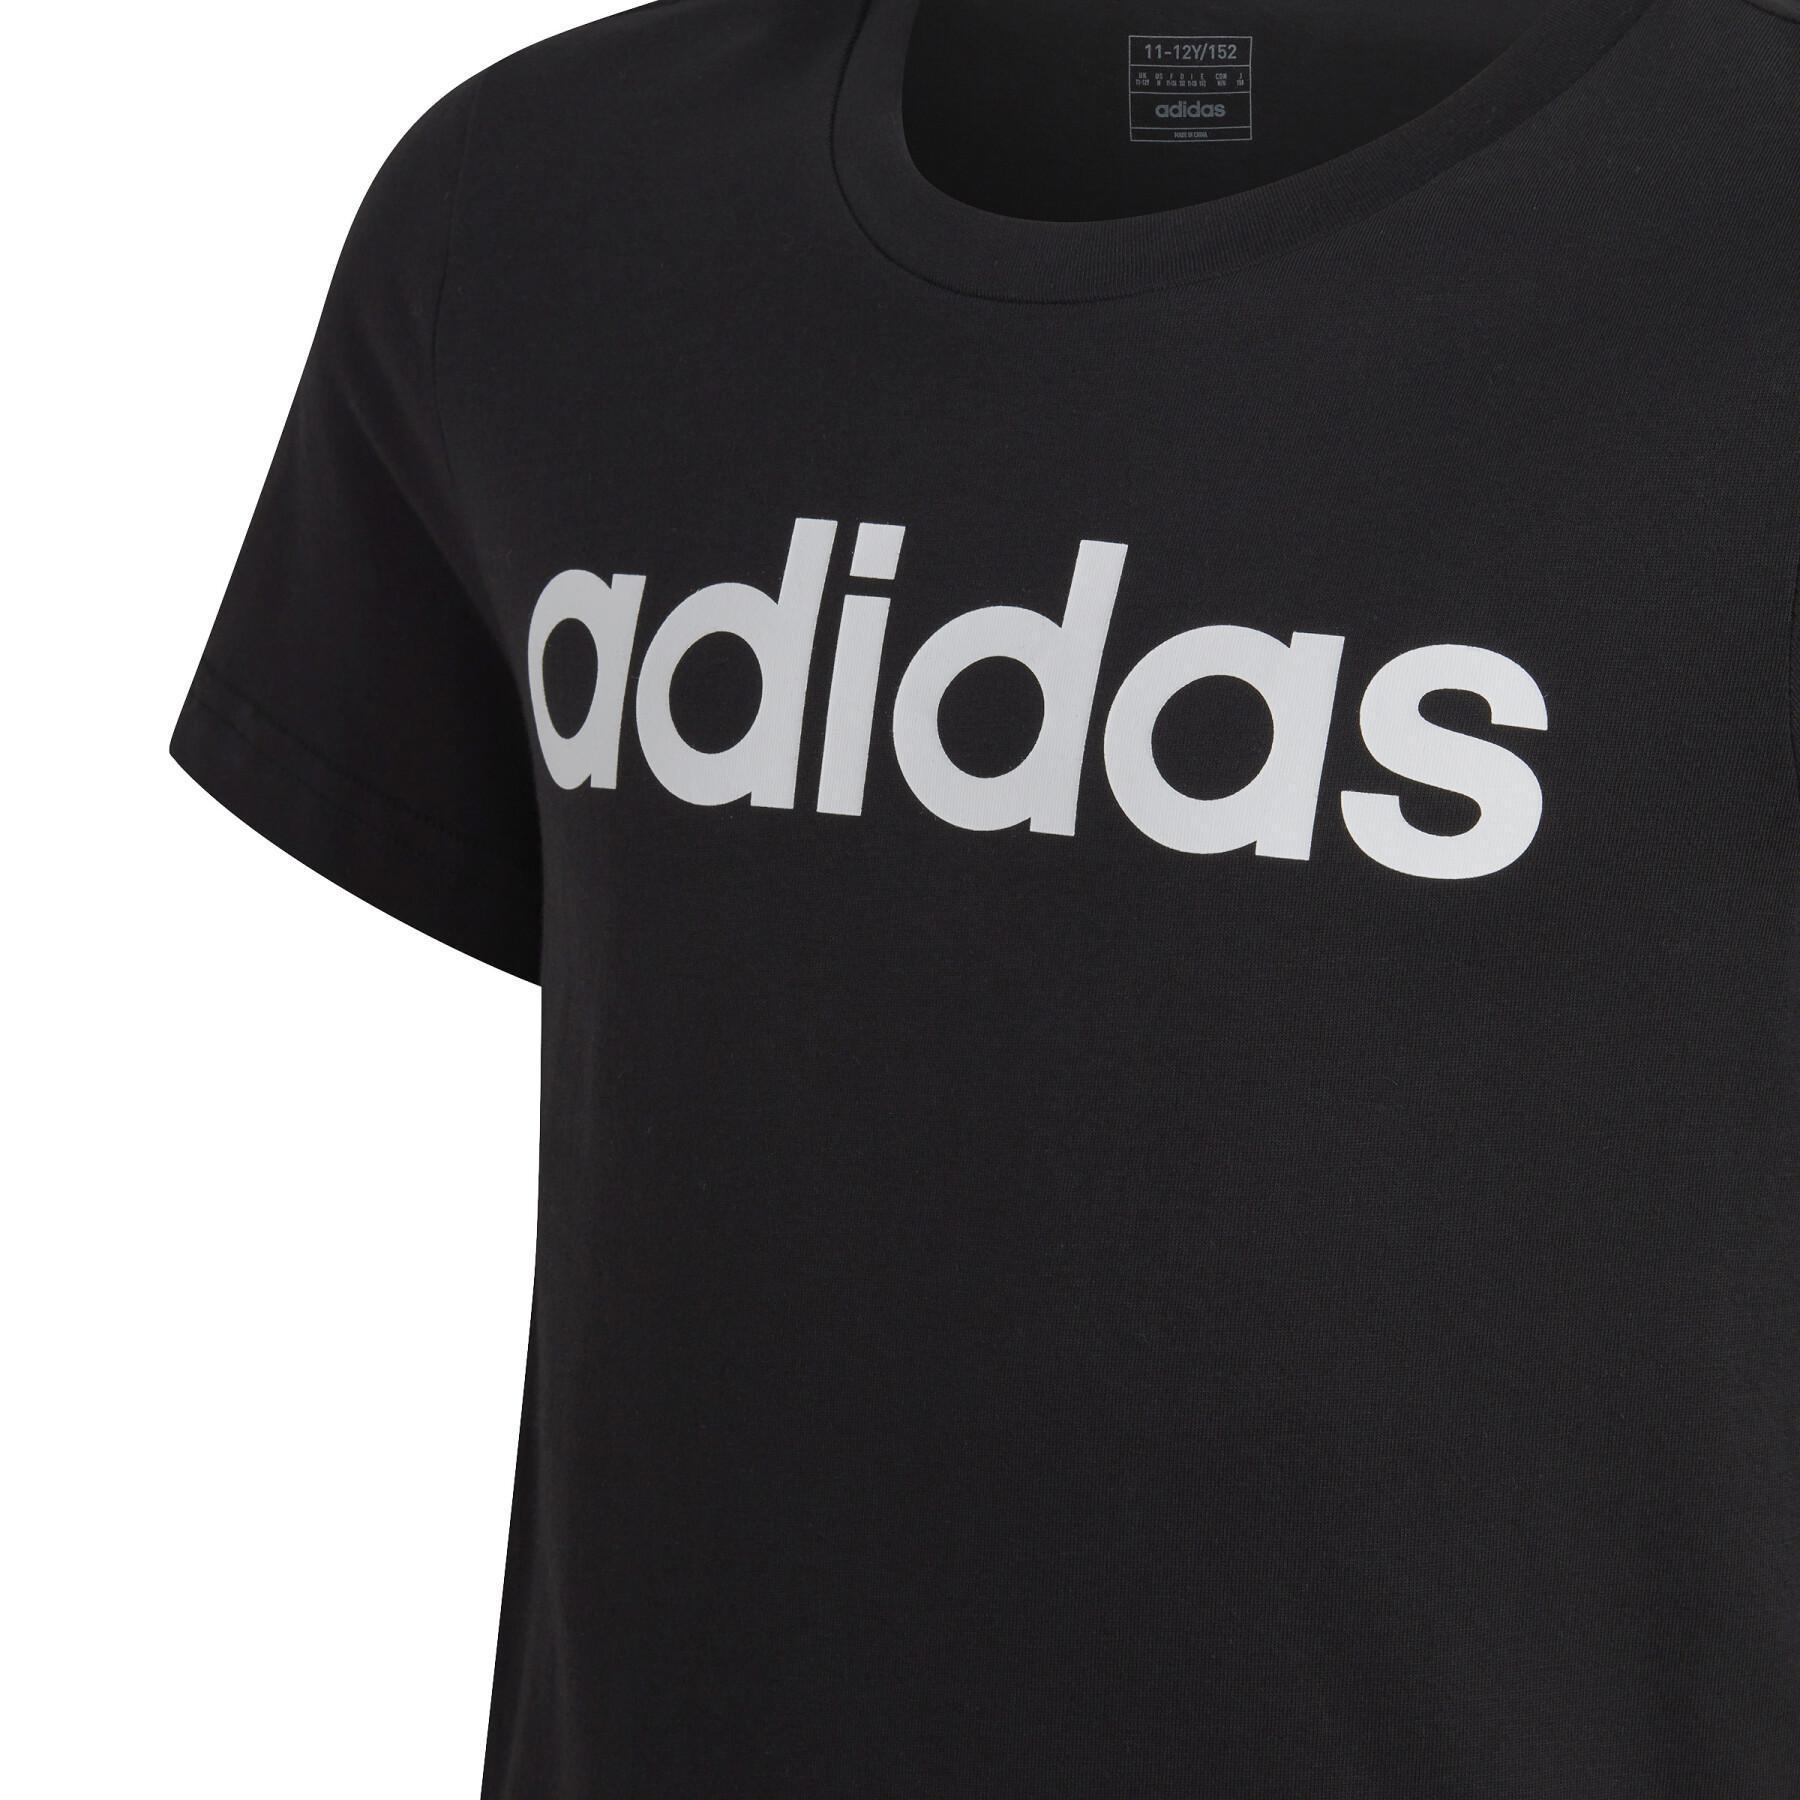 polos Volleyball T-shirts and logo adidas wear - t-shirt Logo Girl\'s Essentials Linear - Textile - cotton